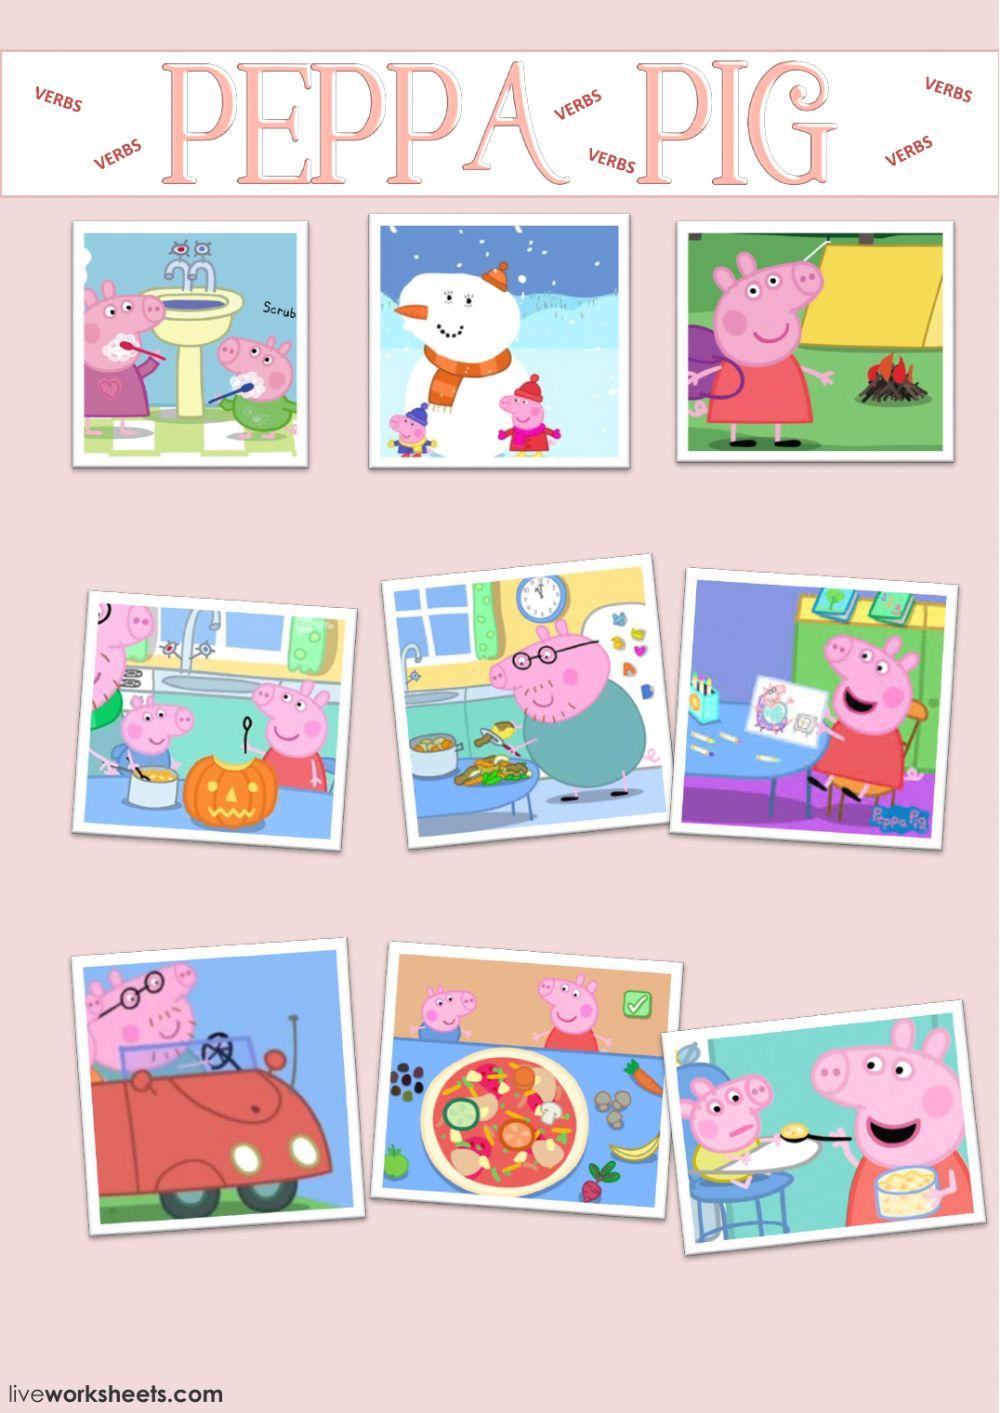 Learn YourVerbs With Peppa Pig